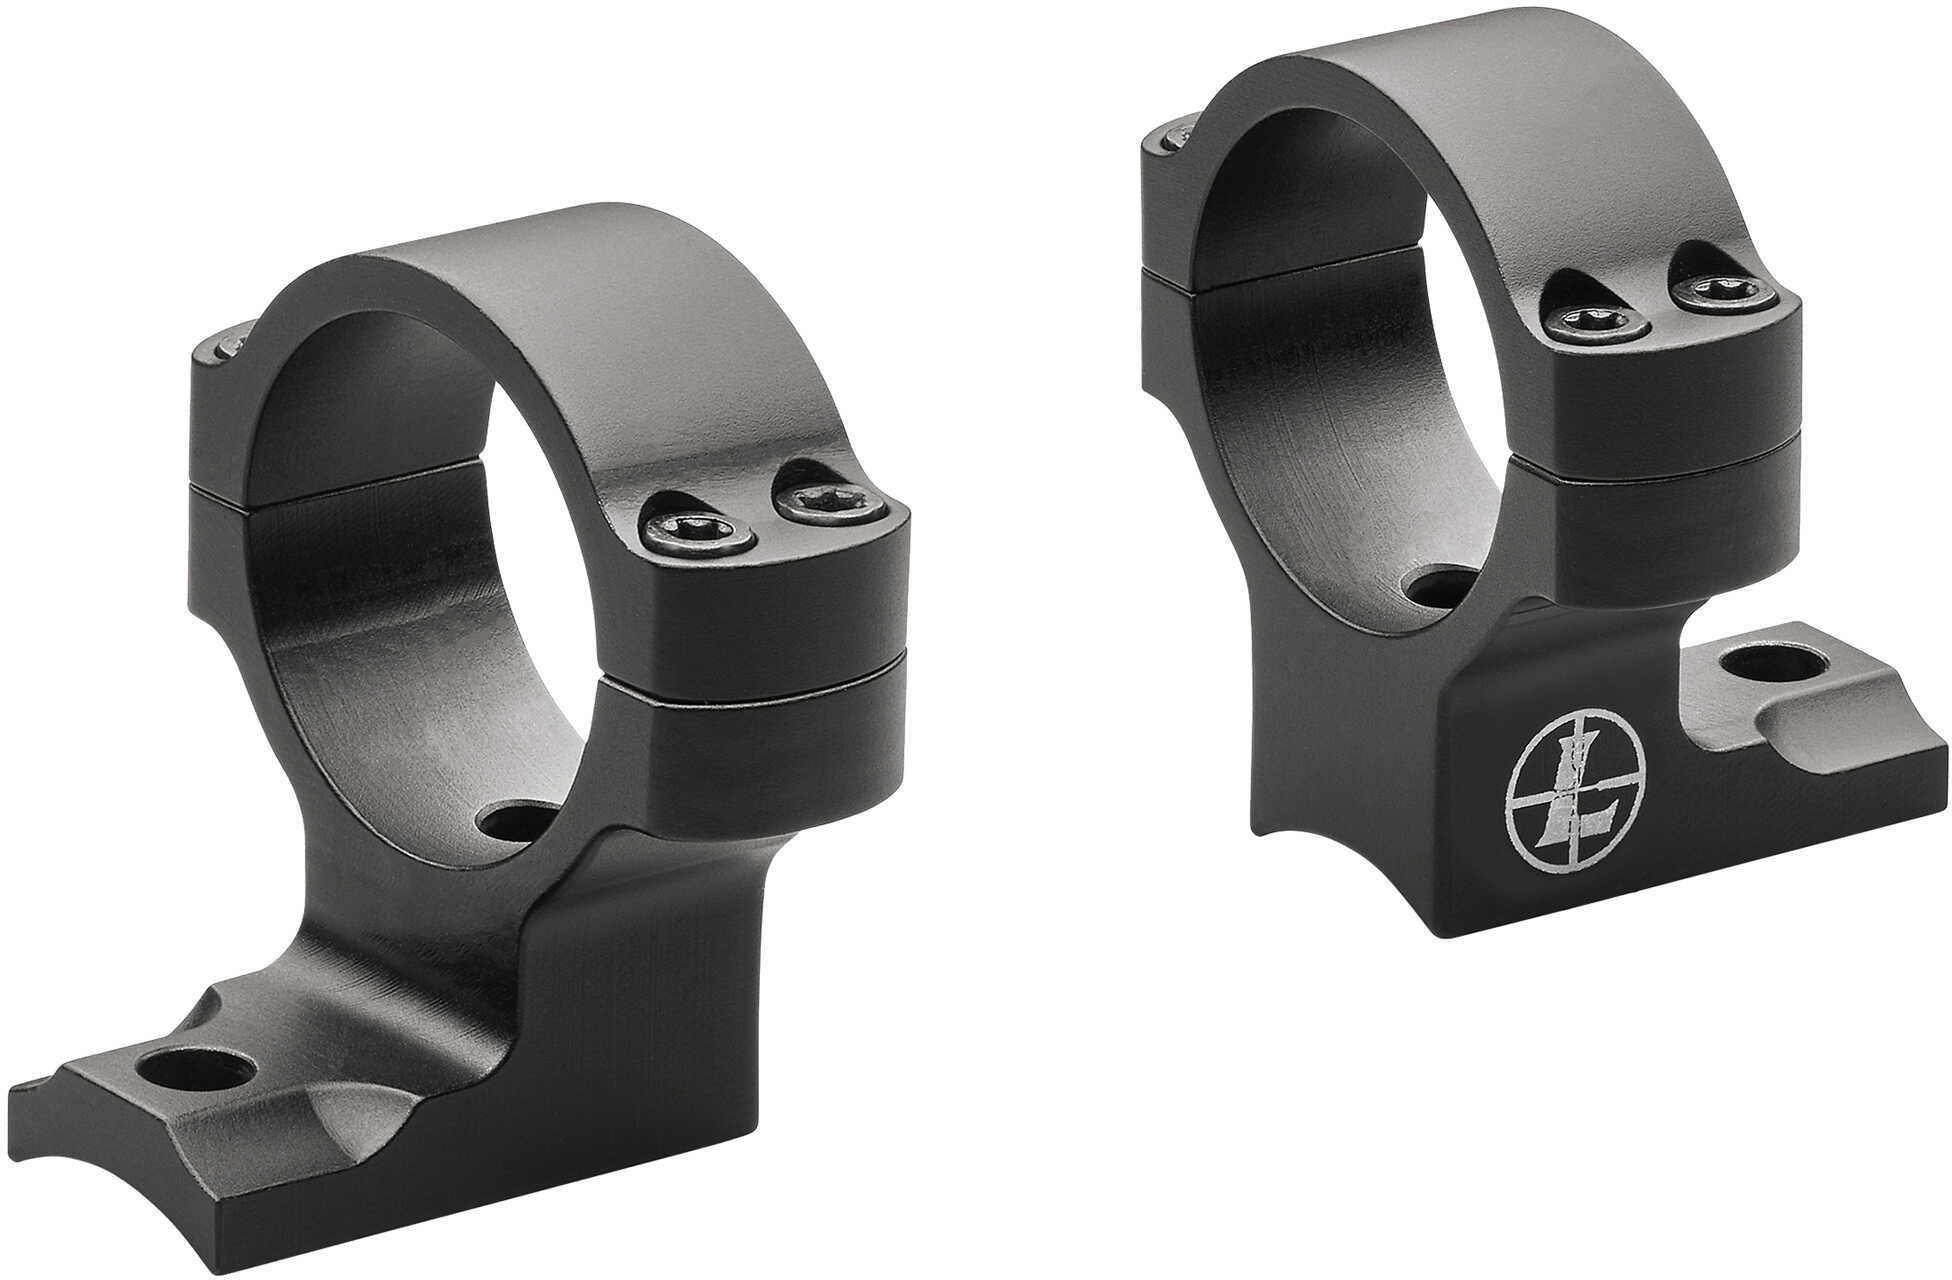 Leupold Backcountry Scope Mounts Integral Rings 1" Diameter High Height Savage 10-16/110-116 Round Rear Axis Matte